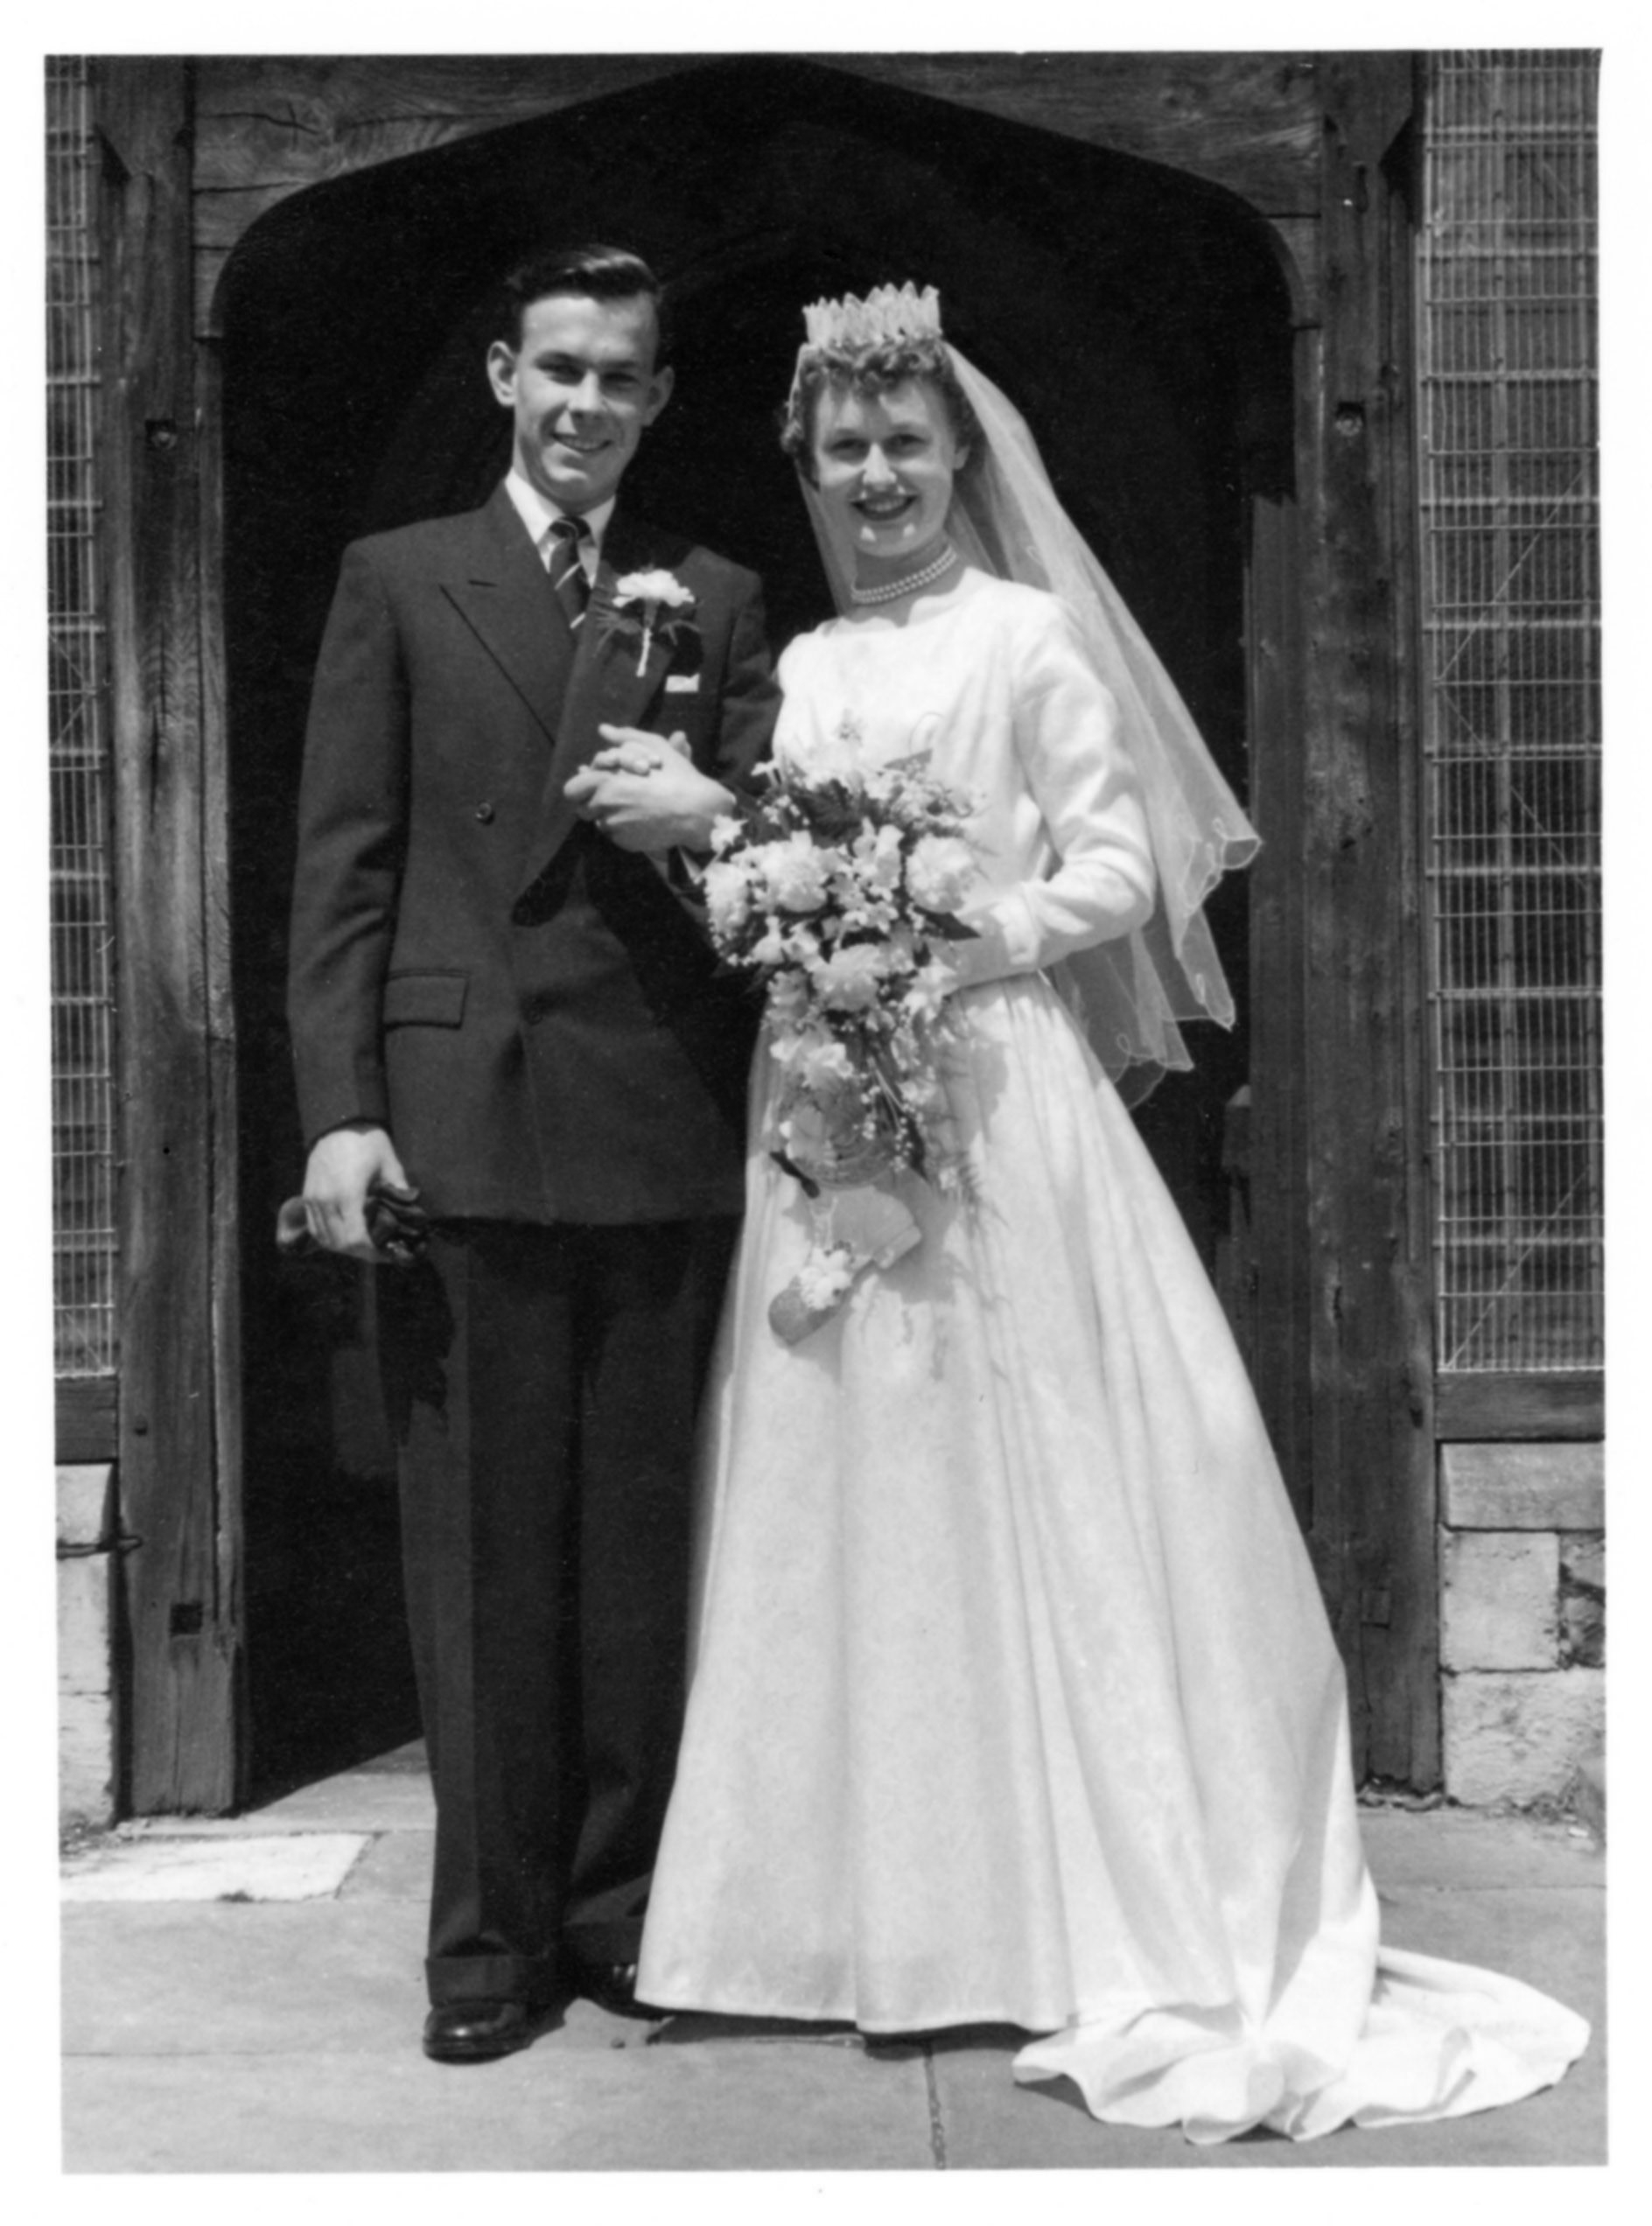 Roger and Sheila Guttery’s Wedding